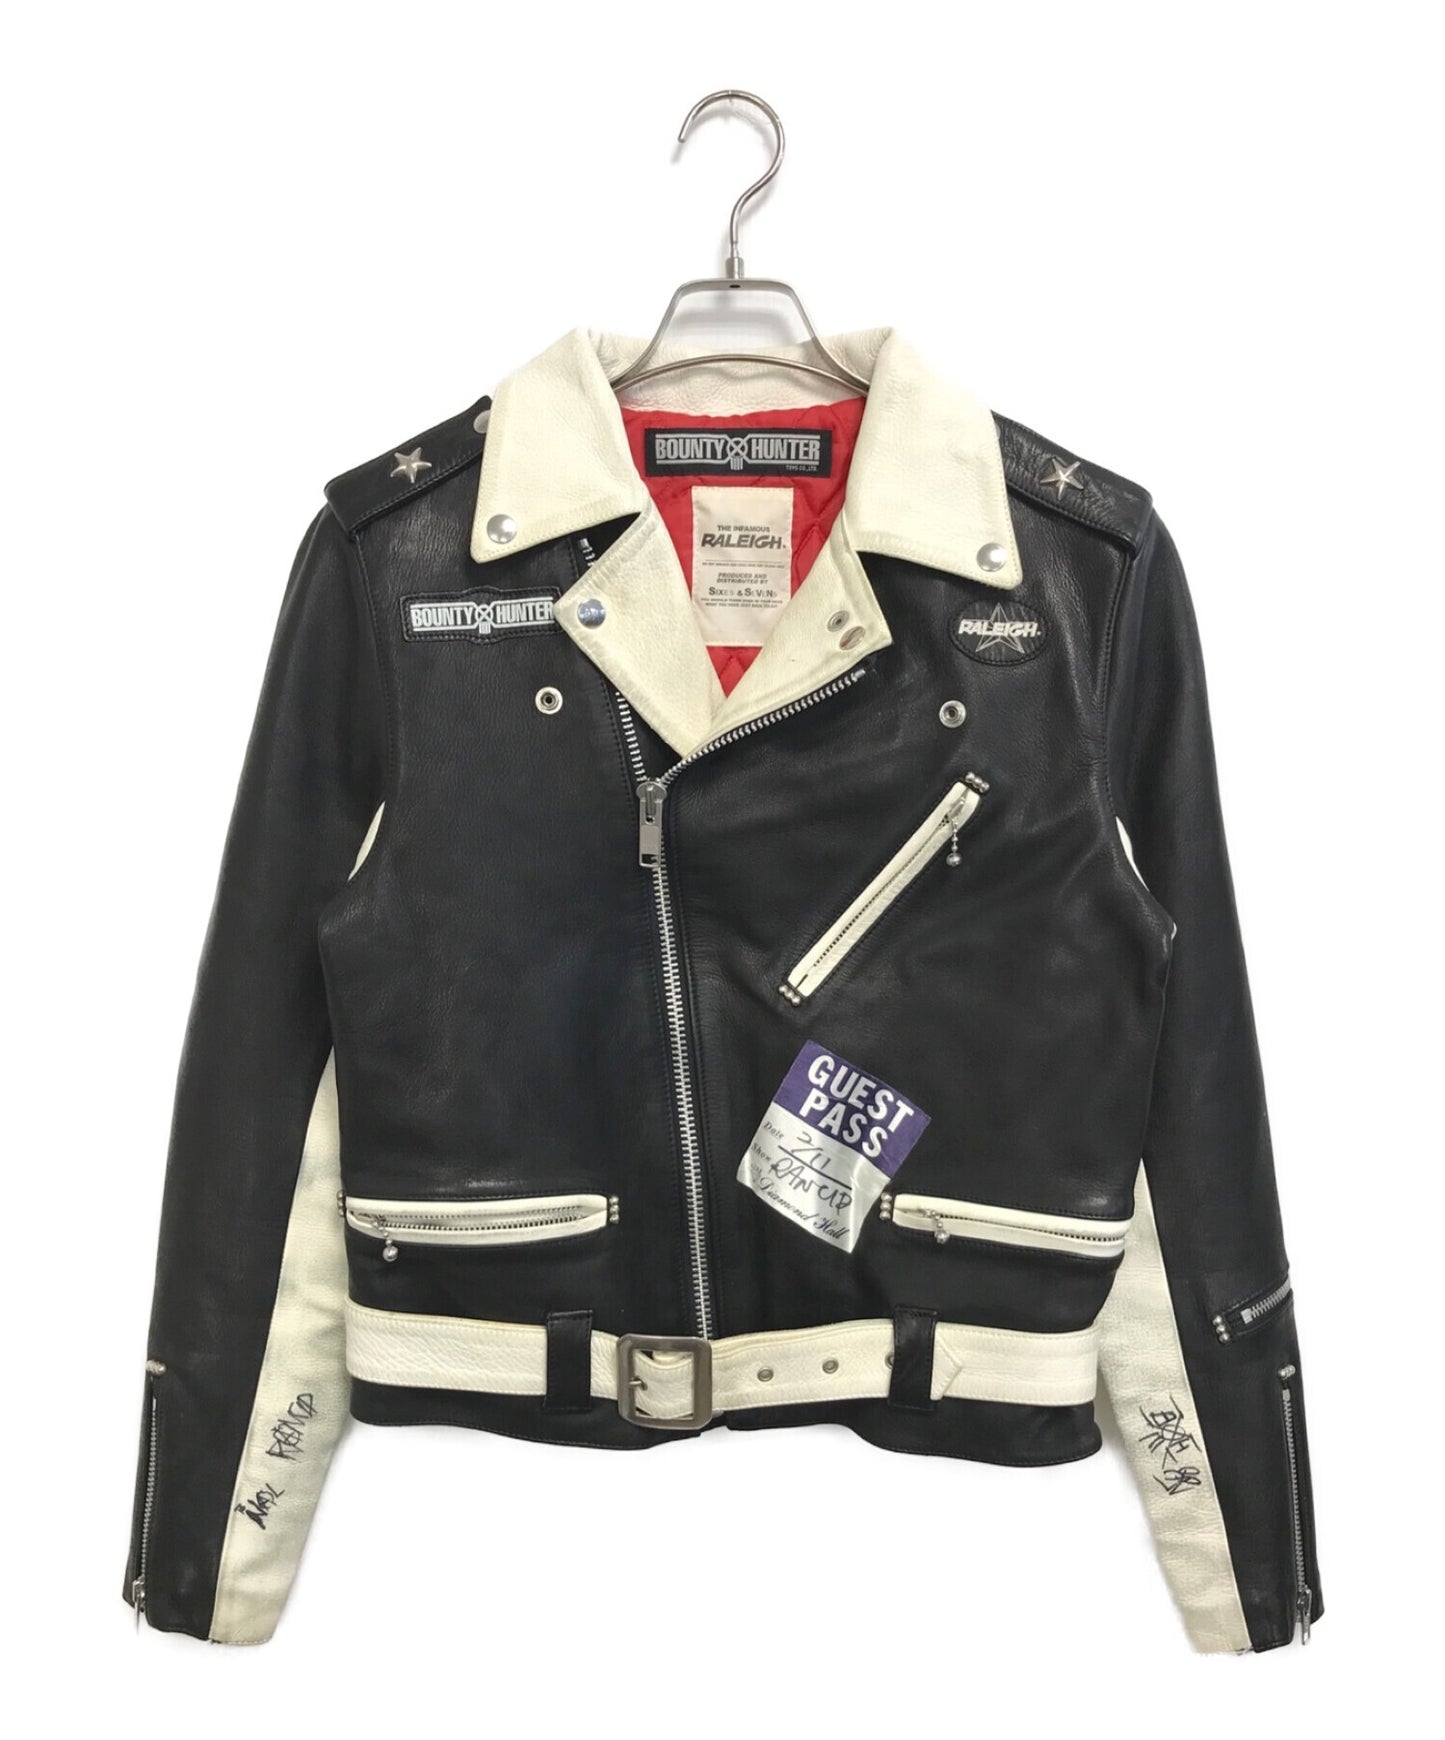 [Pre-owned] BOUNTY HUNTER One Star Double Riders Jacket